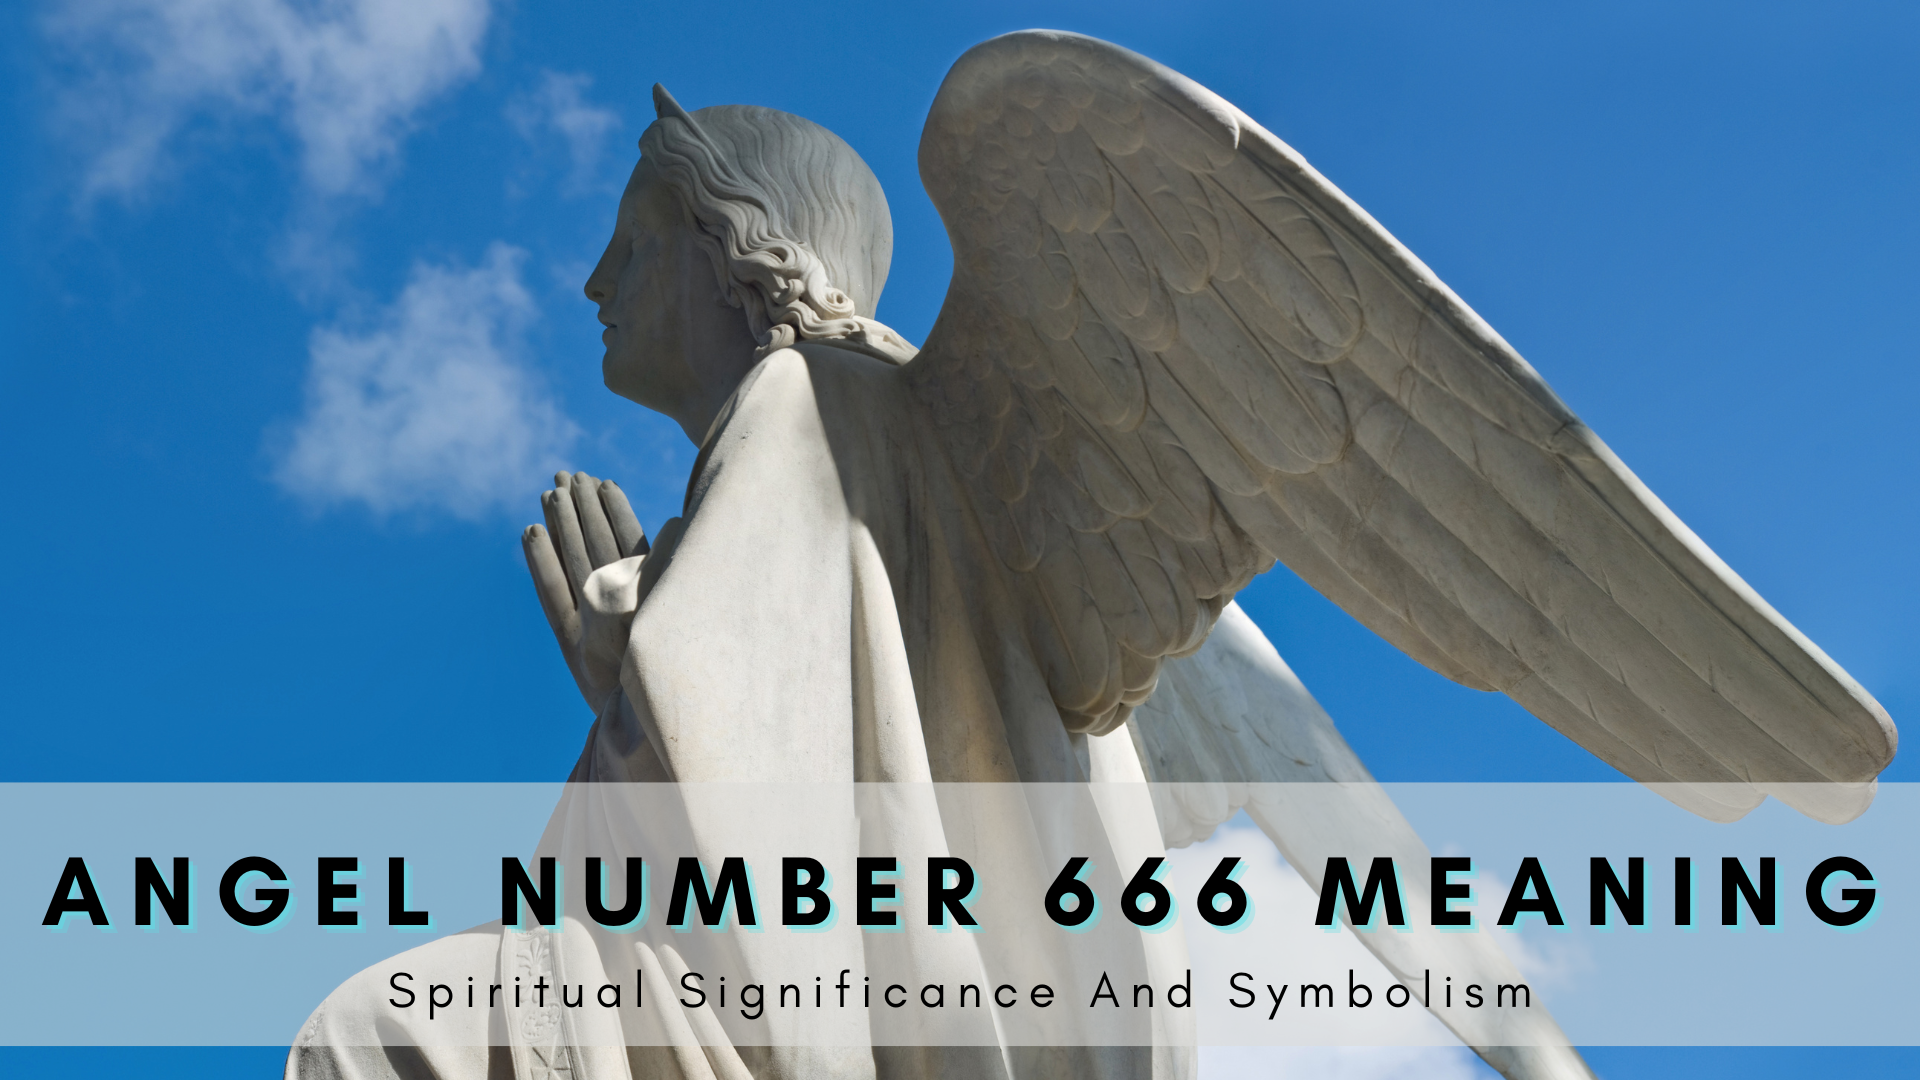 Angel Number 666 Meaning – Spiritual Significance And Symbolism